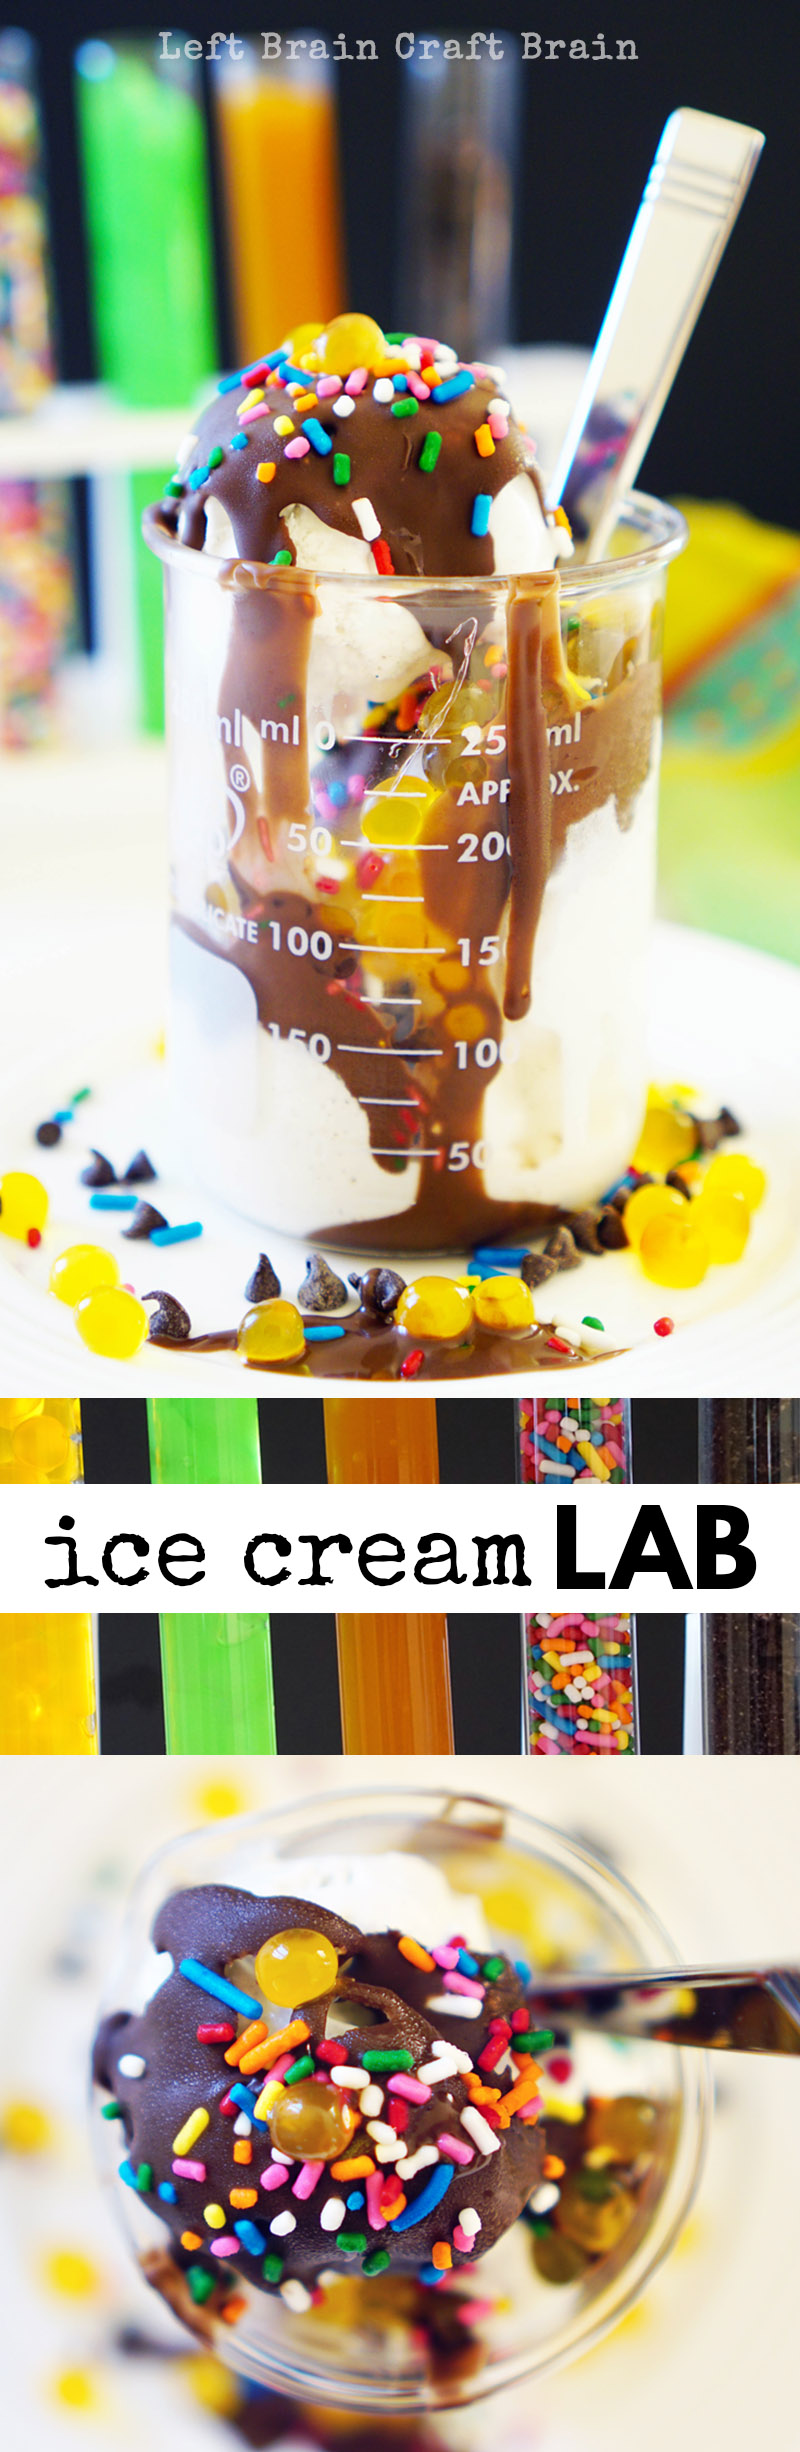 IHere's a science experiment the kids will beg for. This Ice Cream Lab is perfect for Mad Scientist parties, Halloween or a special birthday treat. Or even an end of school year science class celebration.